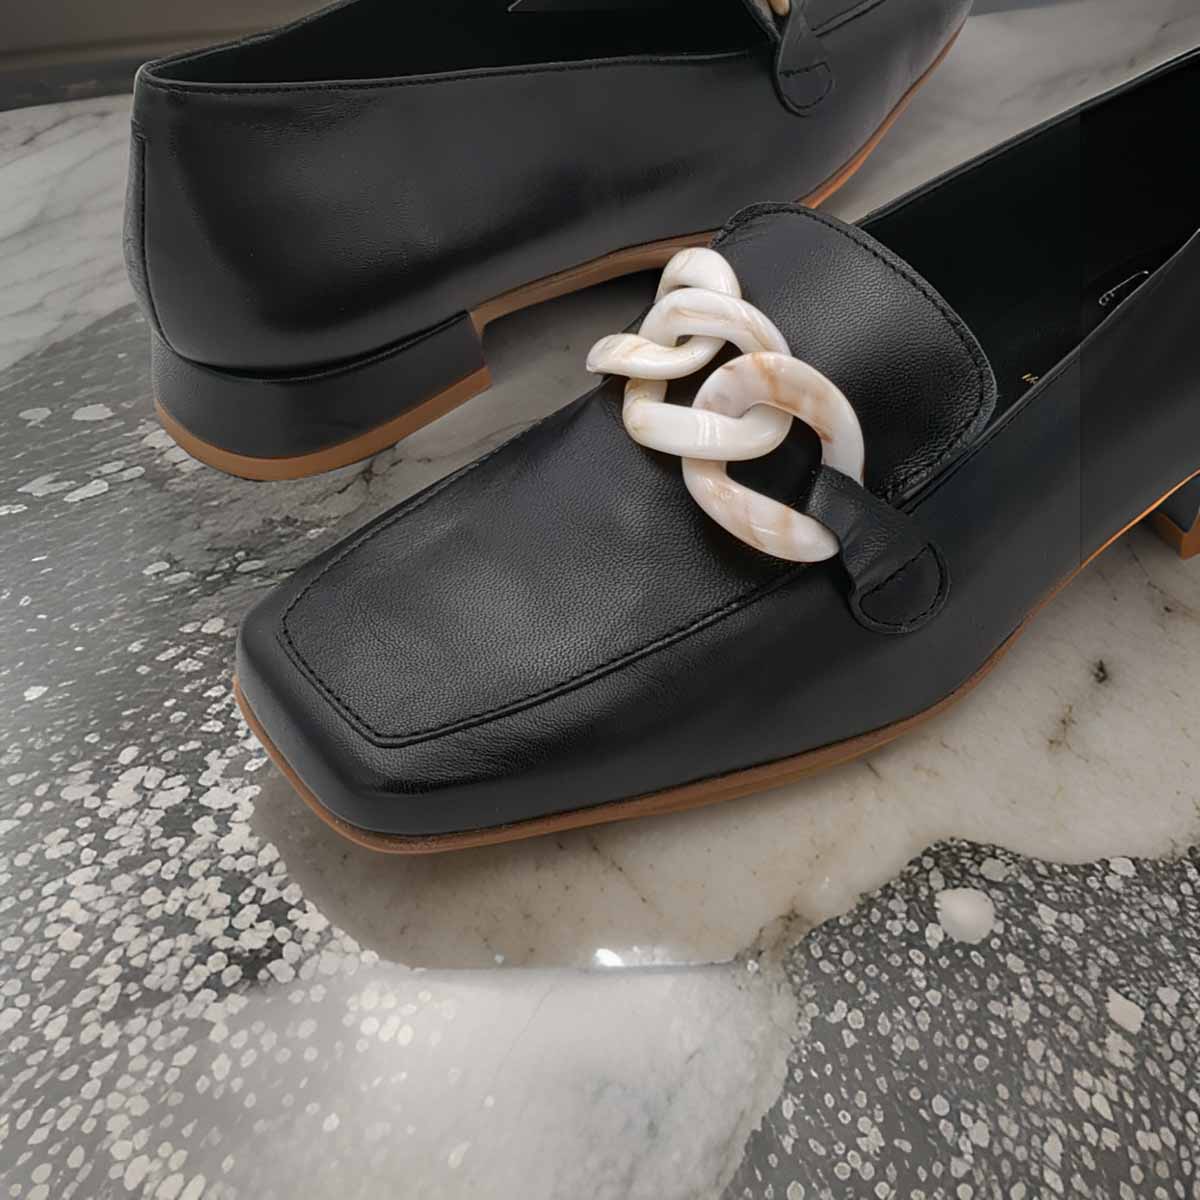 Jose Saenz Black Loafers - Soft Comfort with Marble Chain